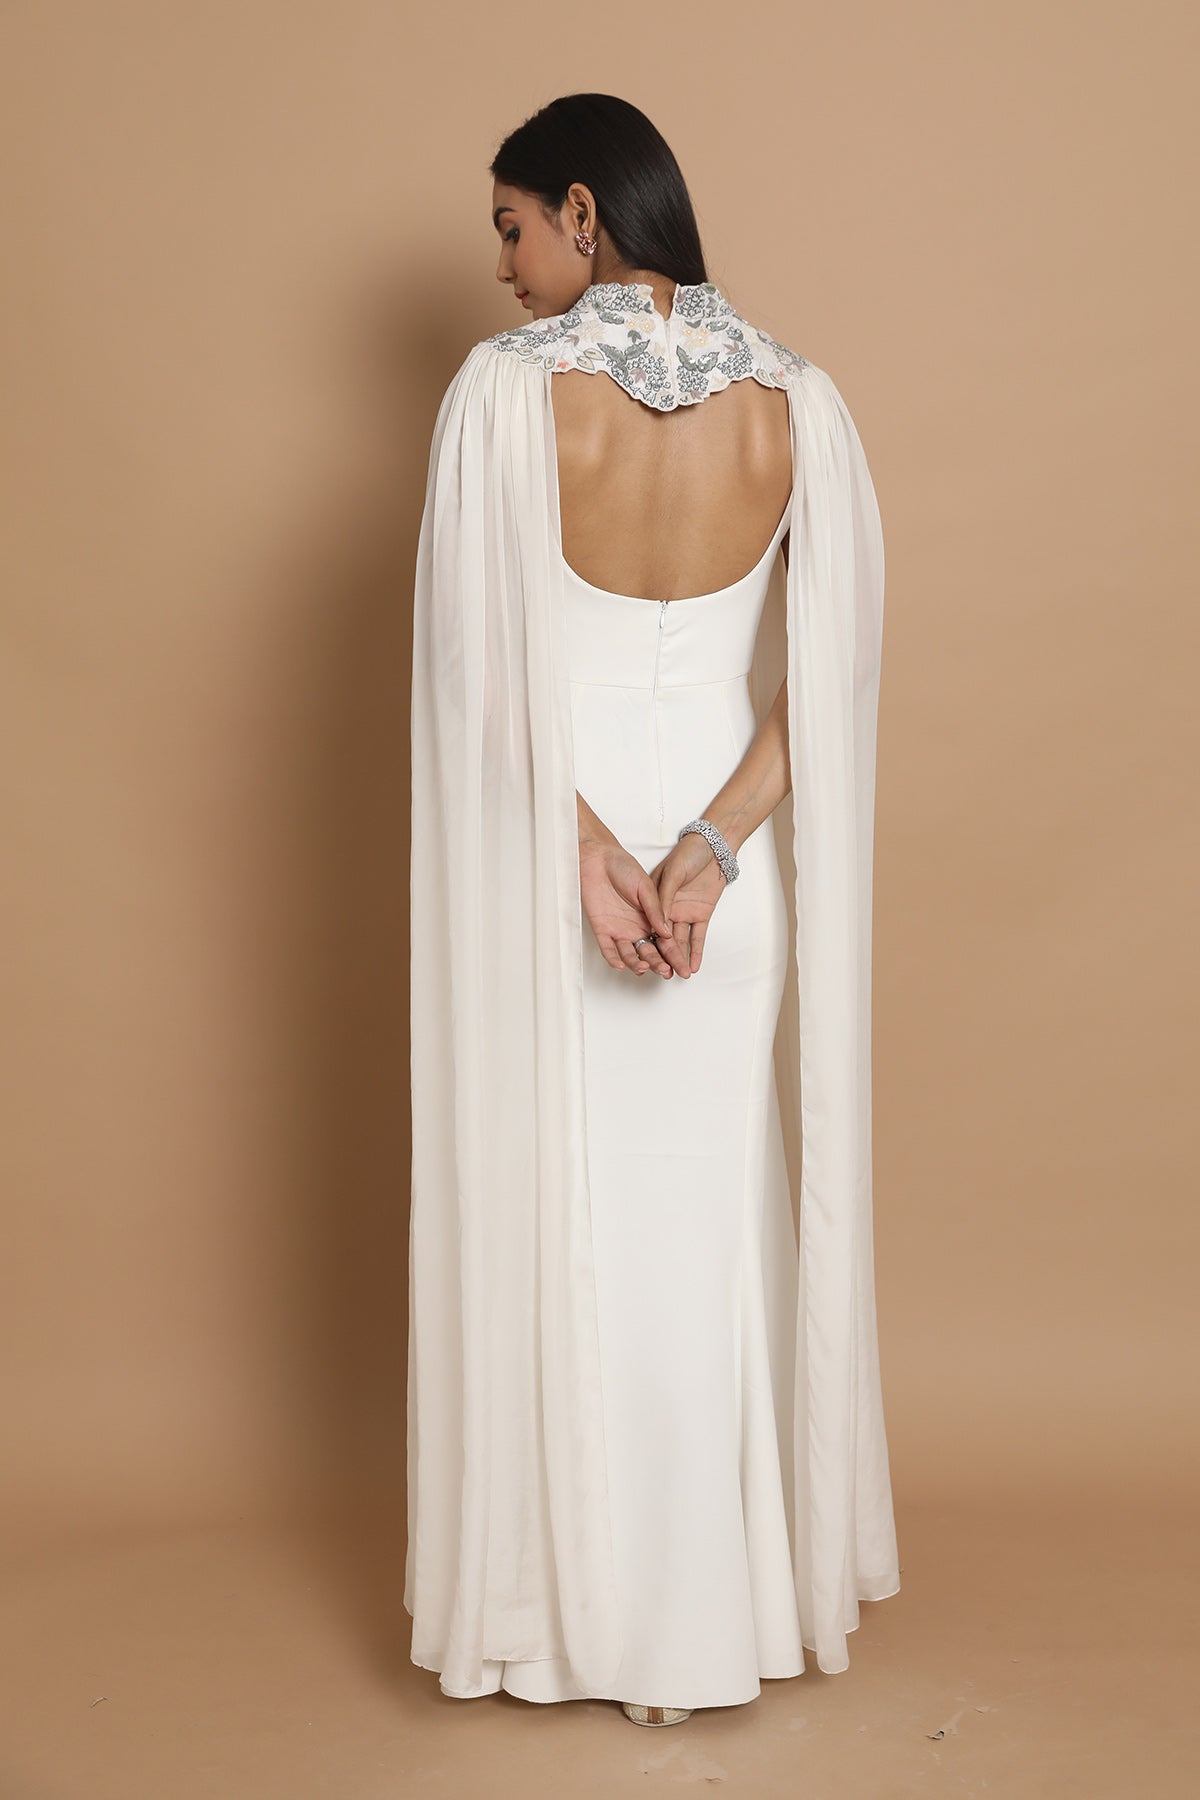 The Ivory Caped Gown